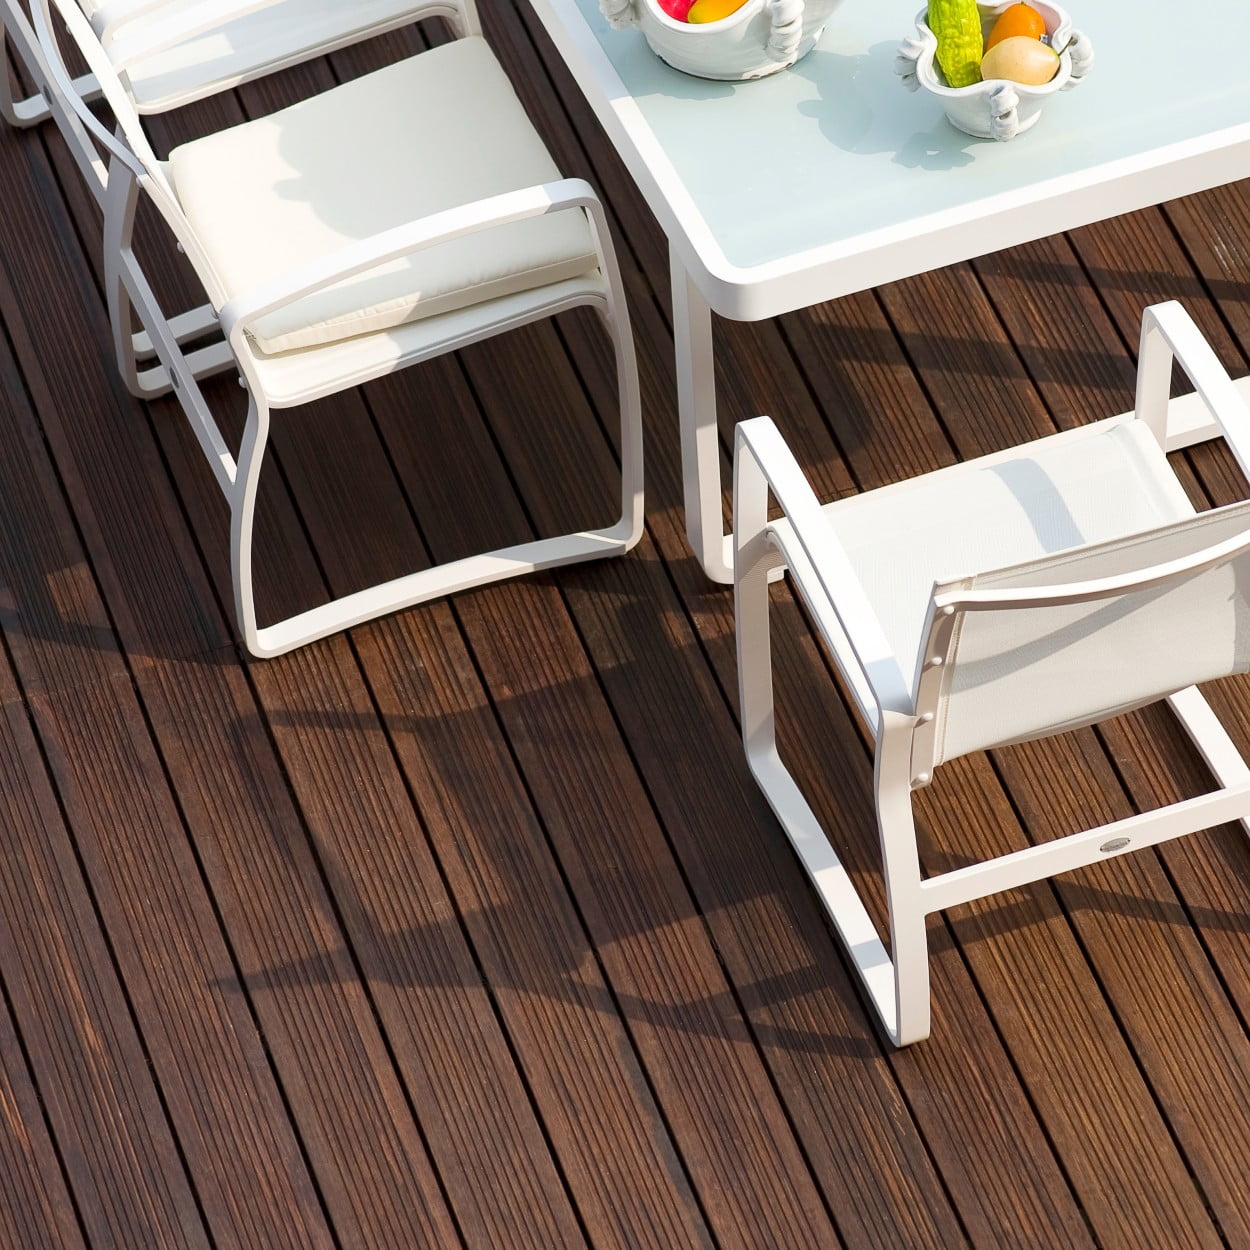 Bamboo Decking With White Chairs and Table